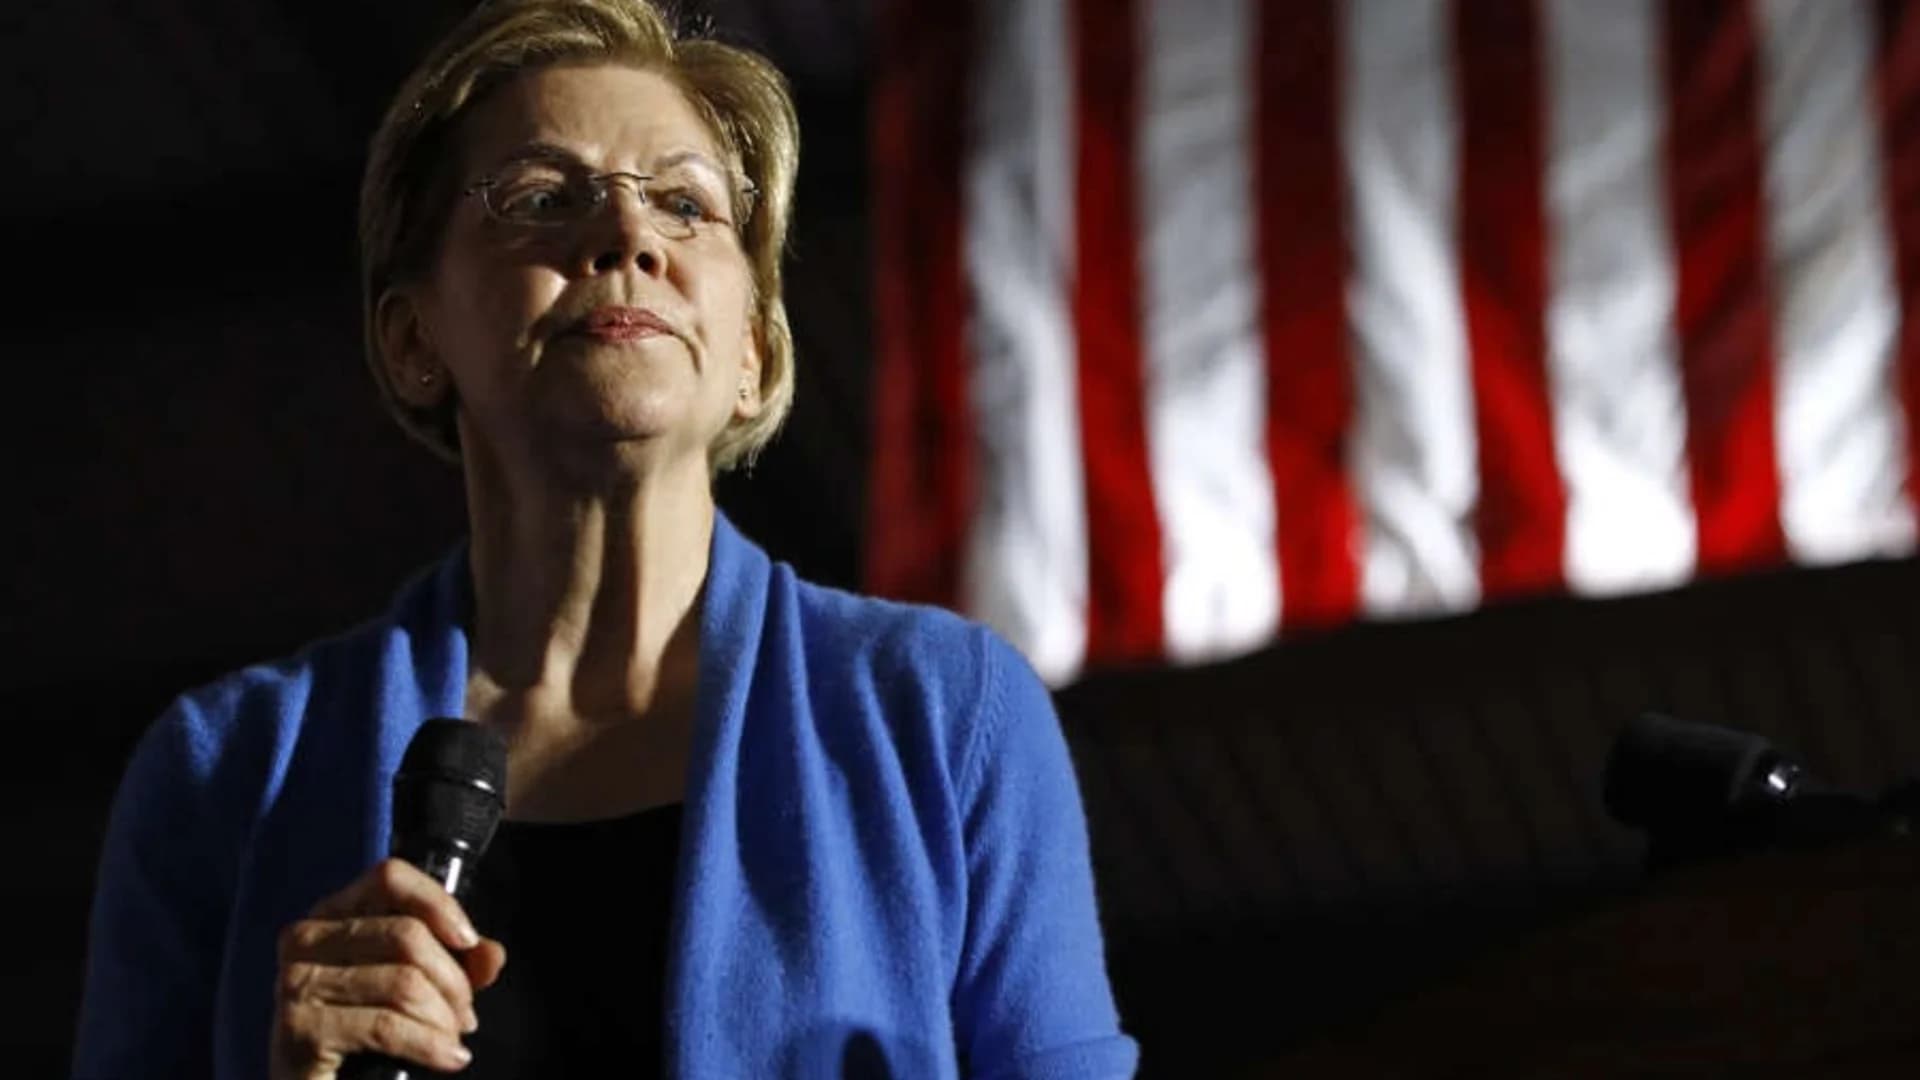 Warren huddles with advisers, reassesses presidential race